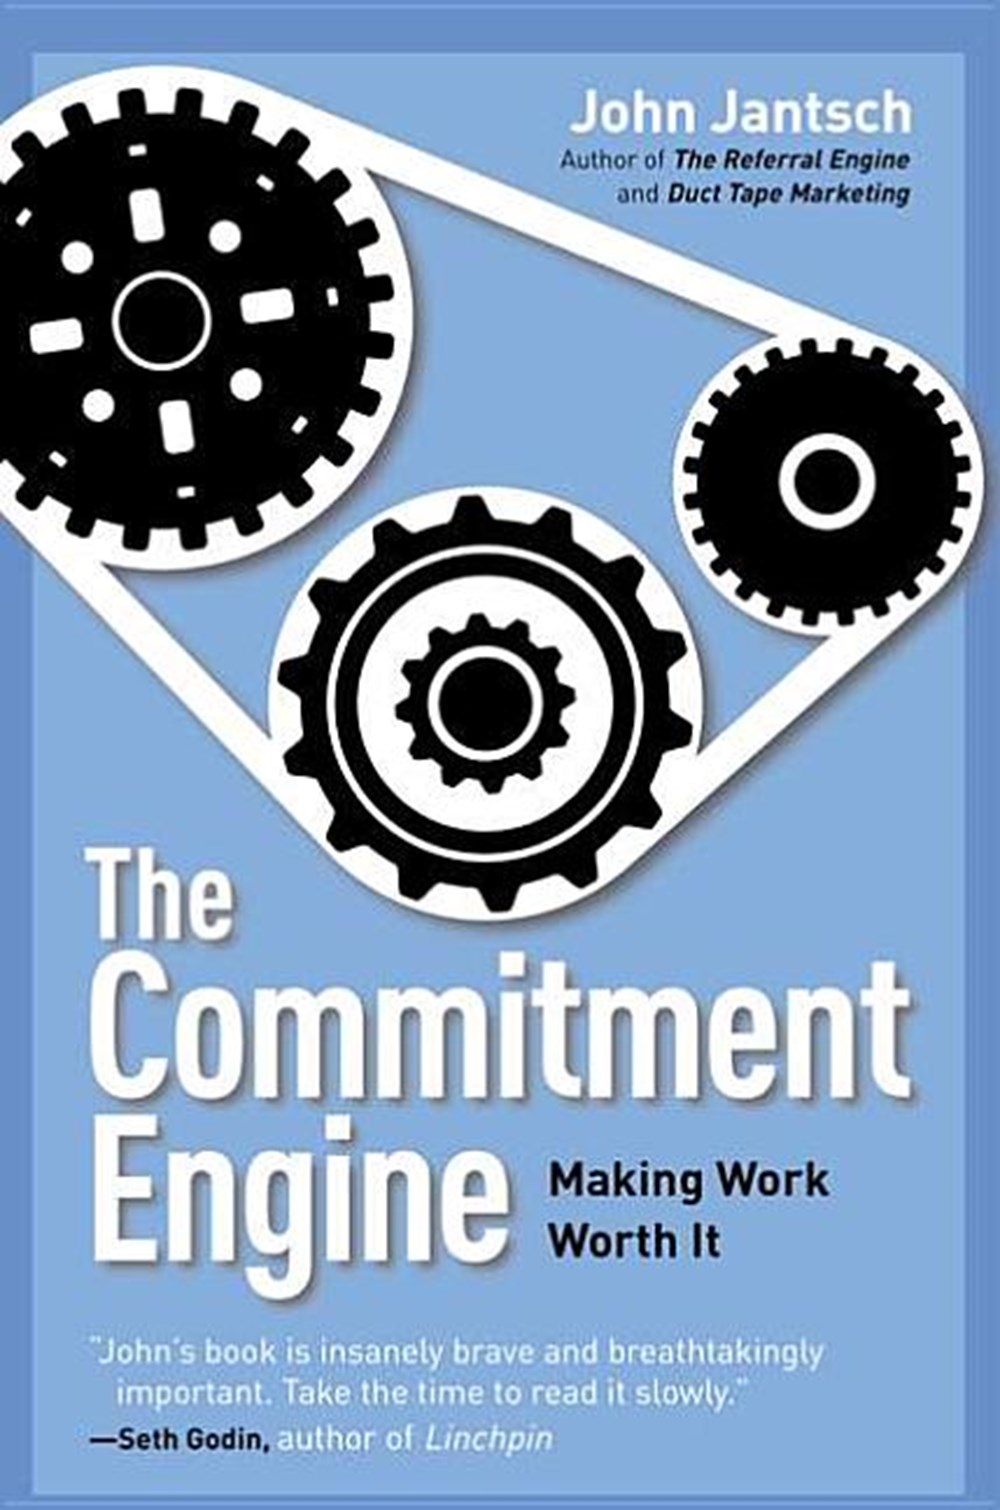 The Commitment Engine Making Work Worth It by John Jantsch